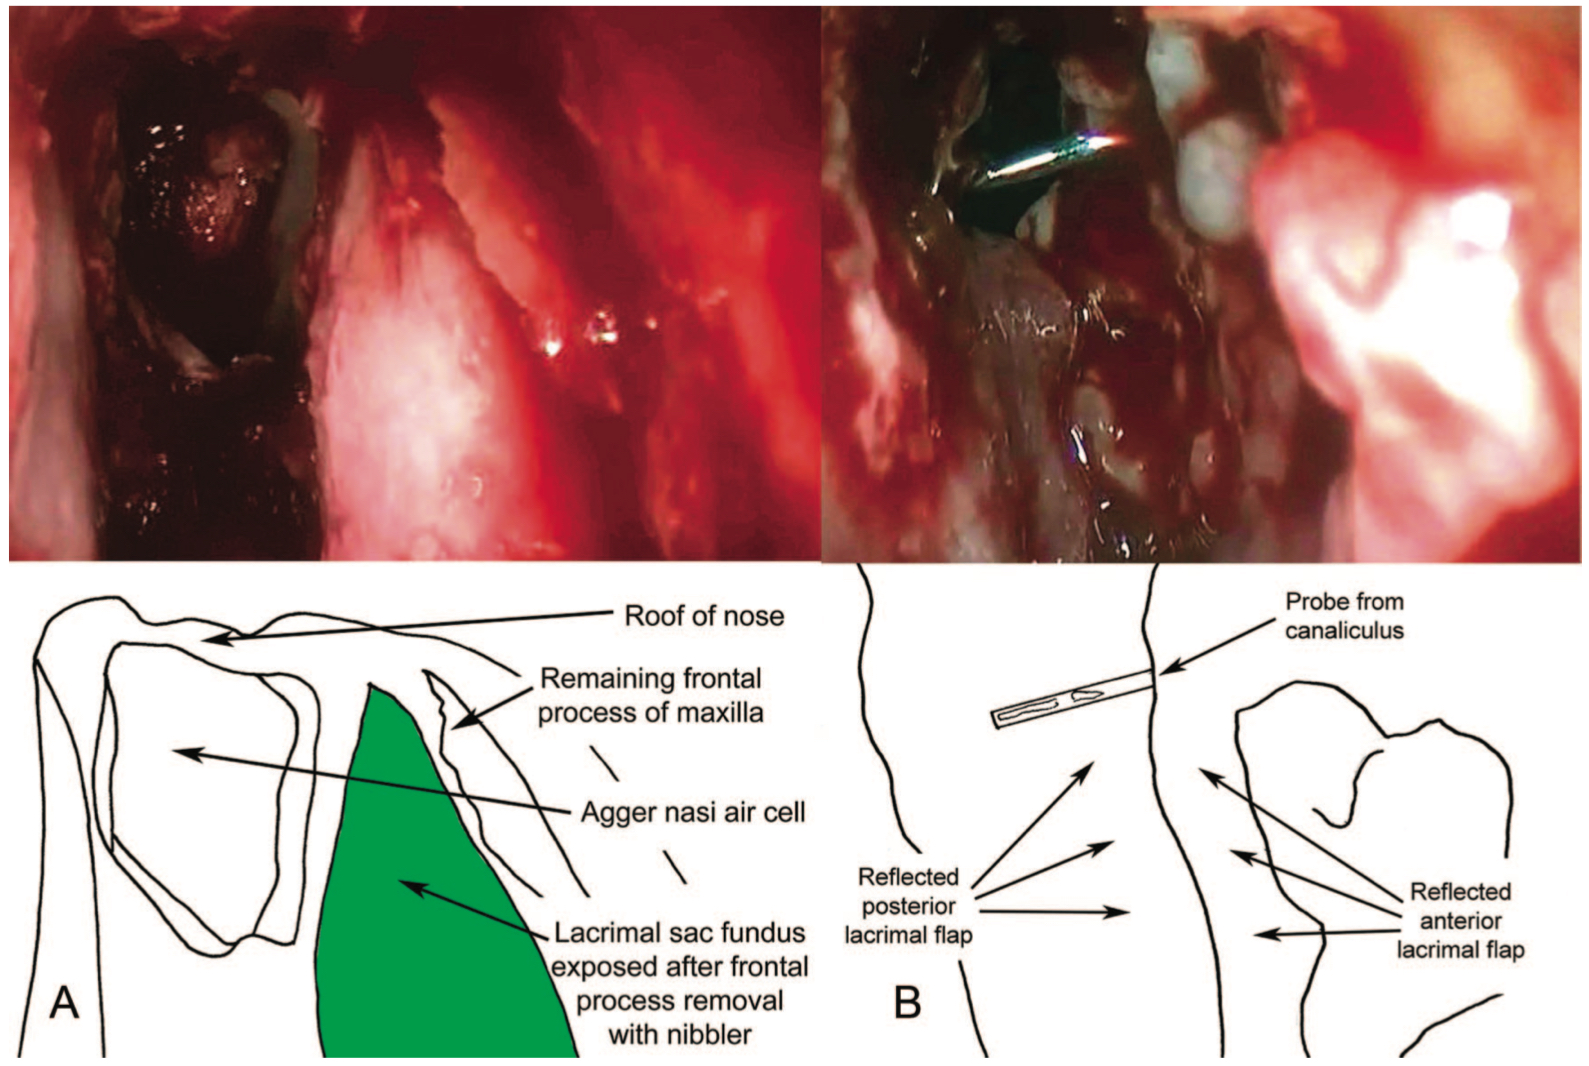 Endoscopic Dacryocystorhinostomy: A view of the lateral wall of the left nasal cavity showing full exposure of the lacrimal sac (A) and marsupialization of the lacrimal sac (B)